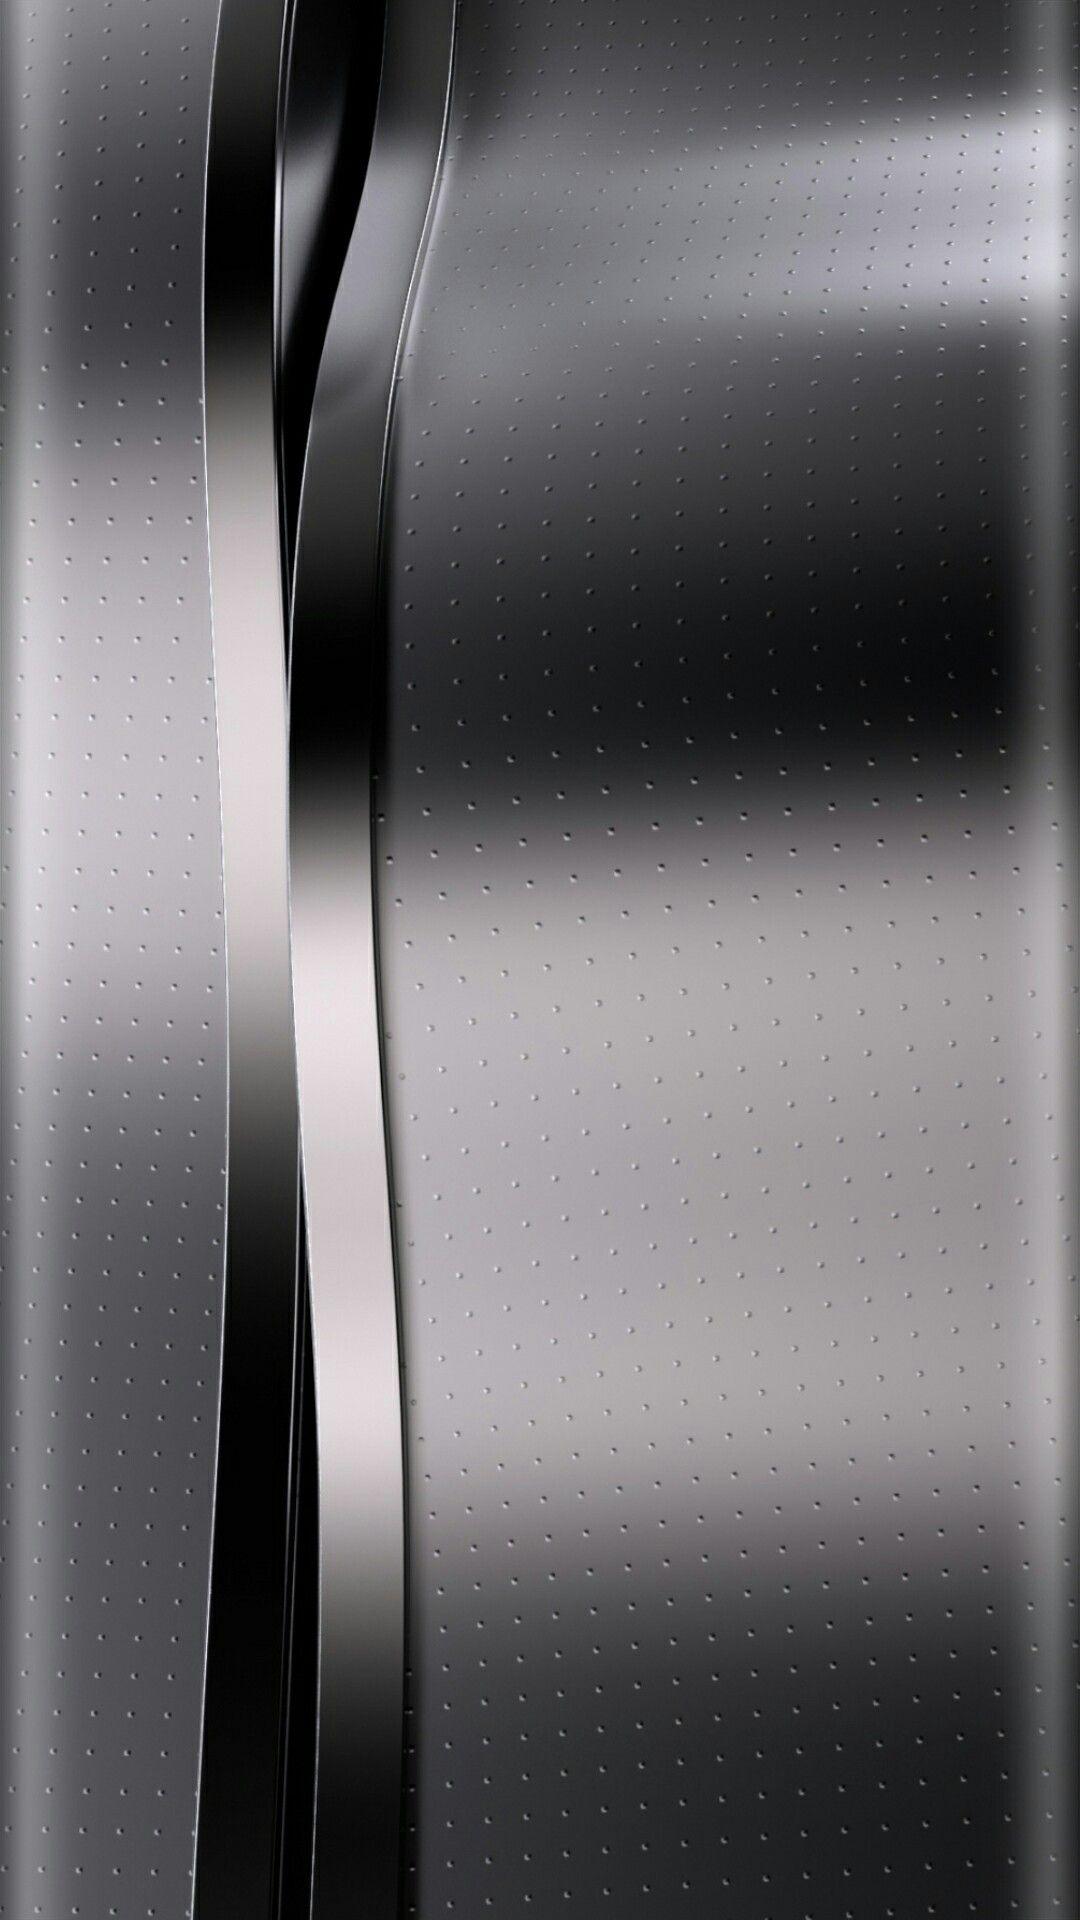 Silver and Black Chrome Wallpaper. *Abstract and Geometric